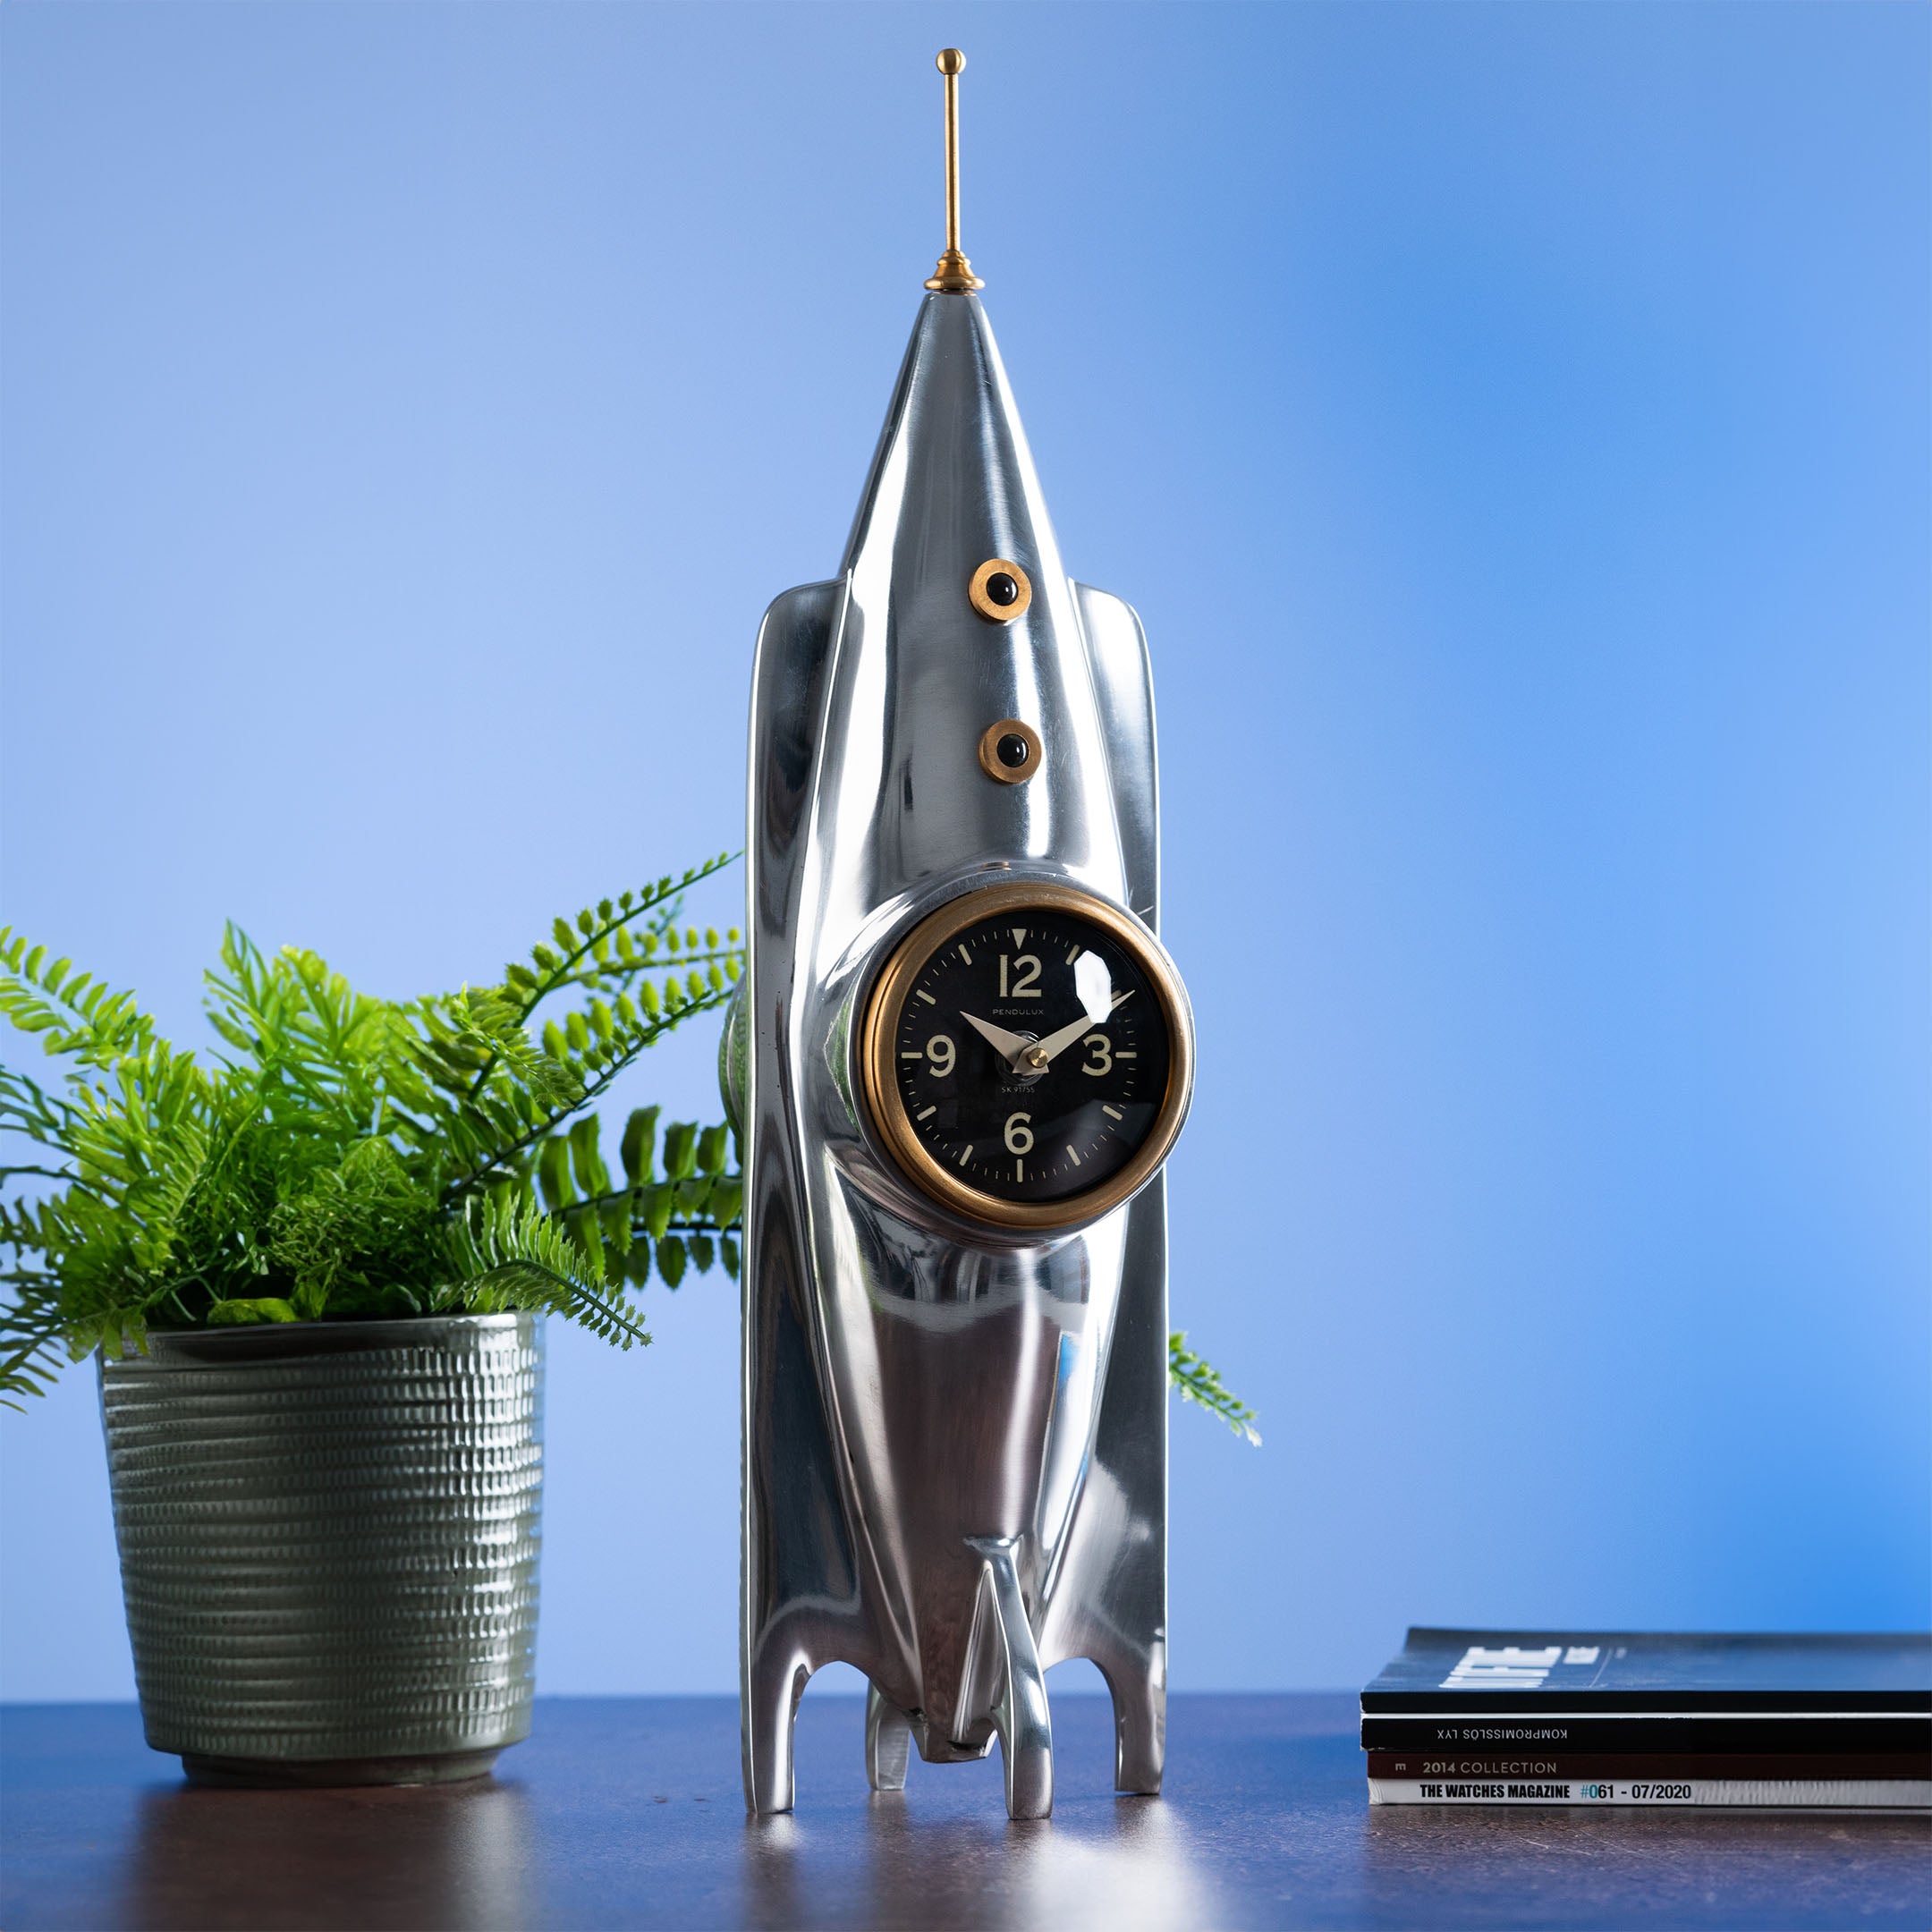 The Pendulux Clocks Collection - Rocket Table Clock